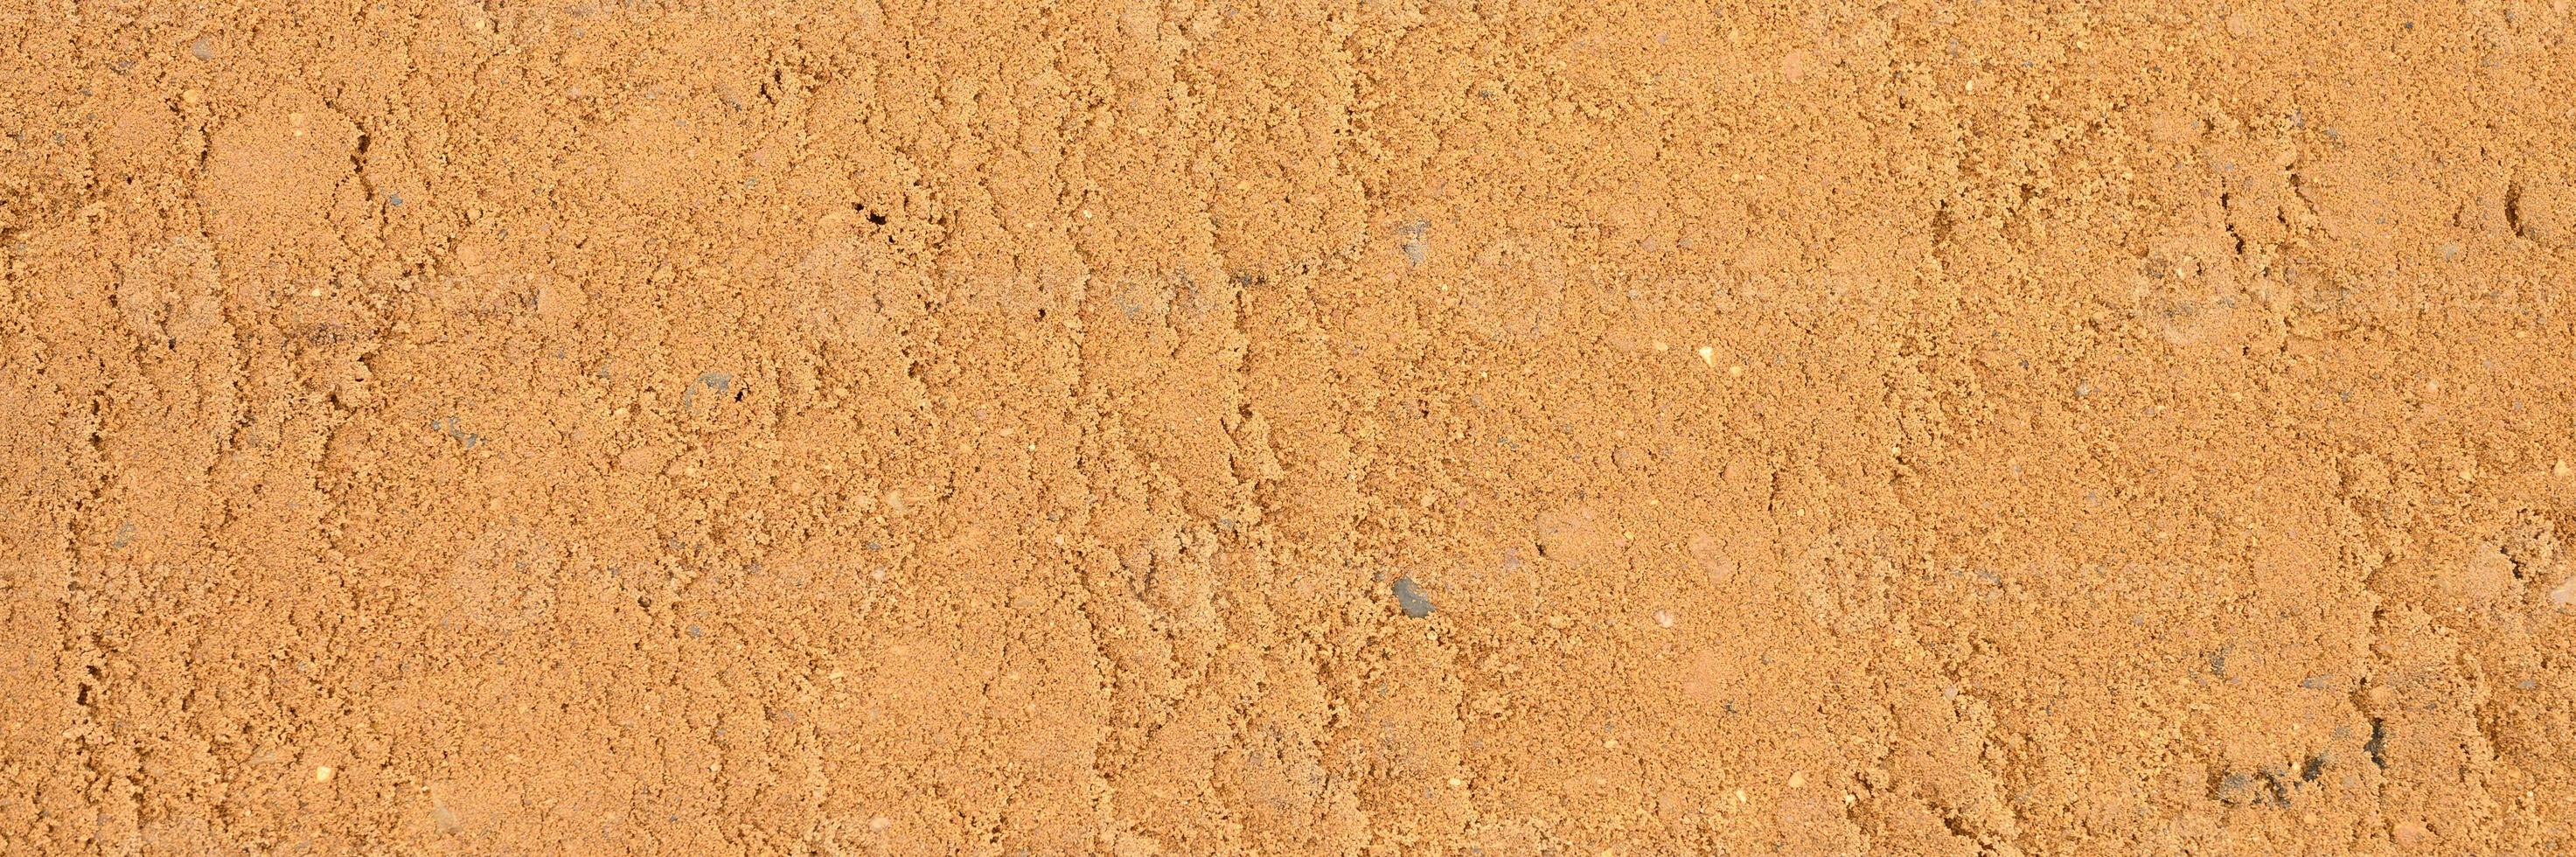 Background texture from the smooth surface of the sand photo